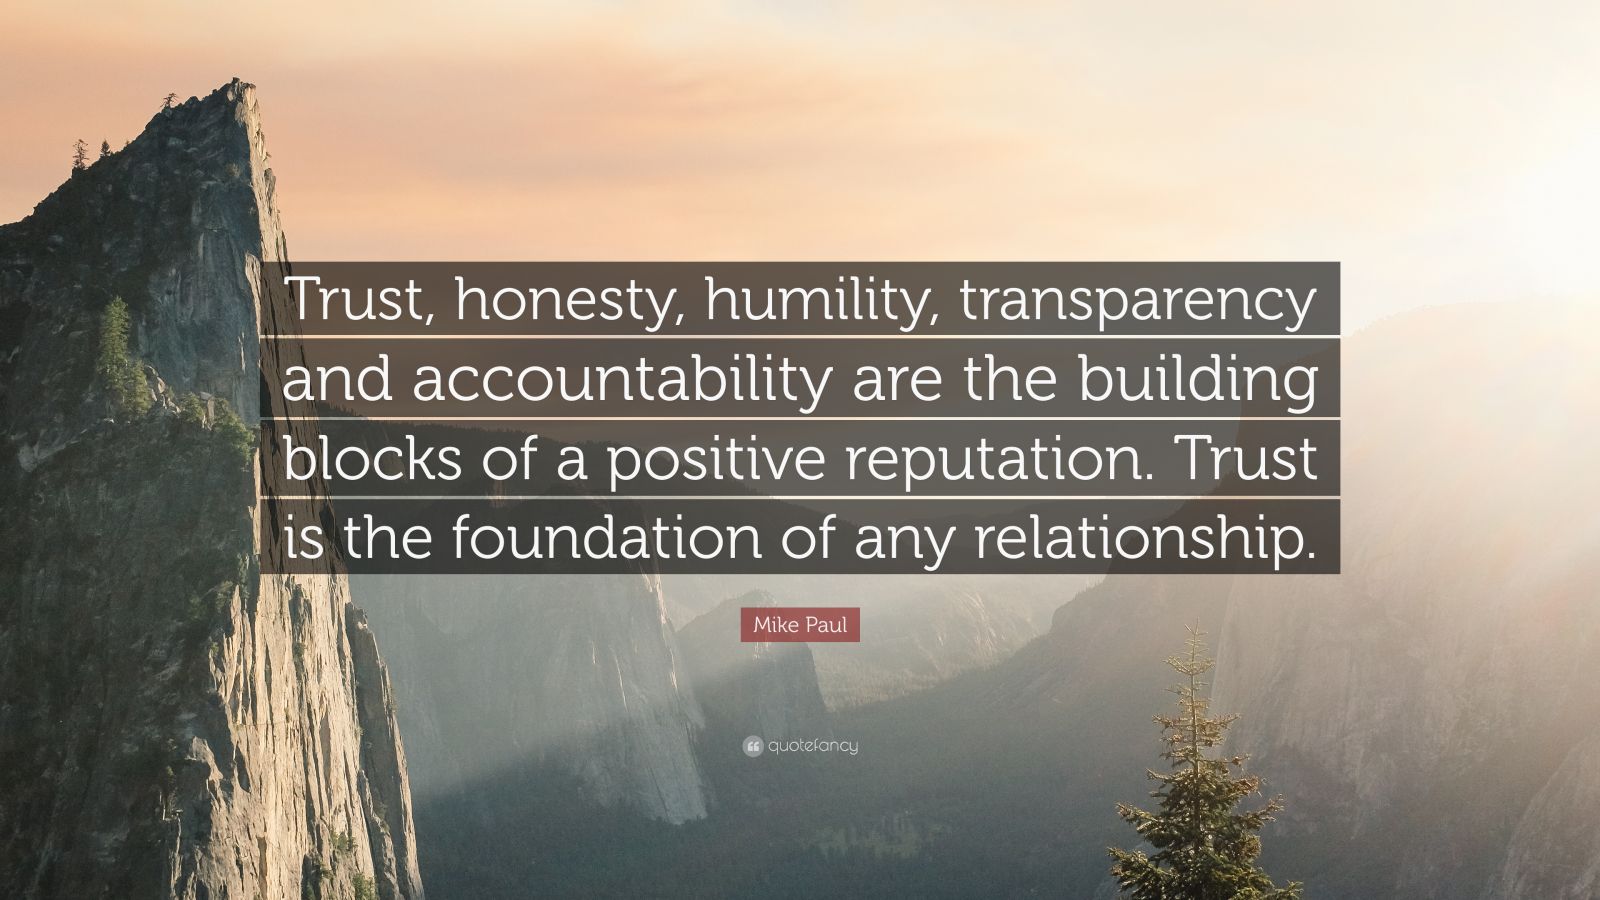 Mike Paul Quote: “Trust, honesty, humility, transparency and